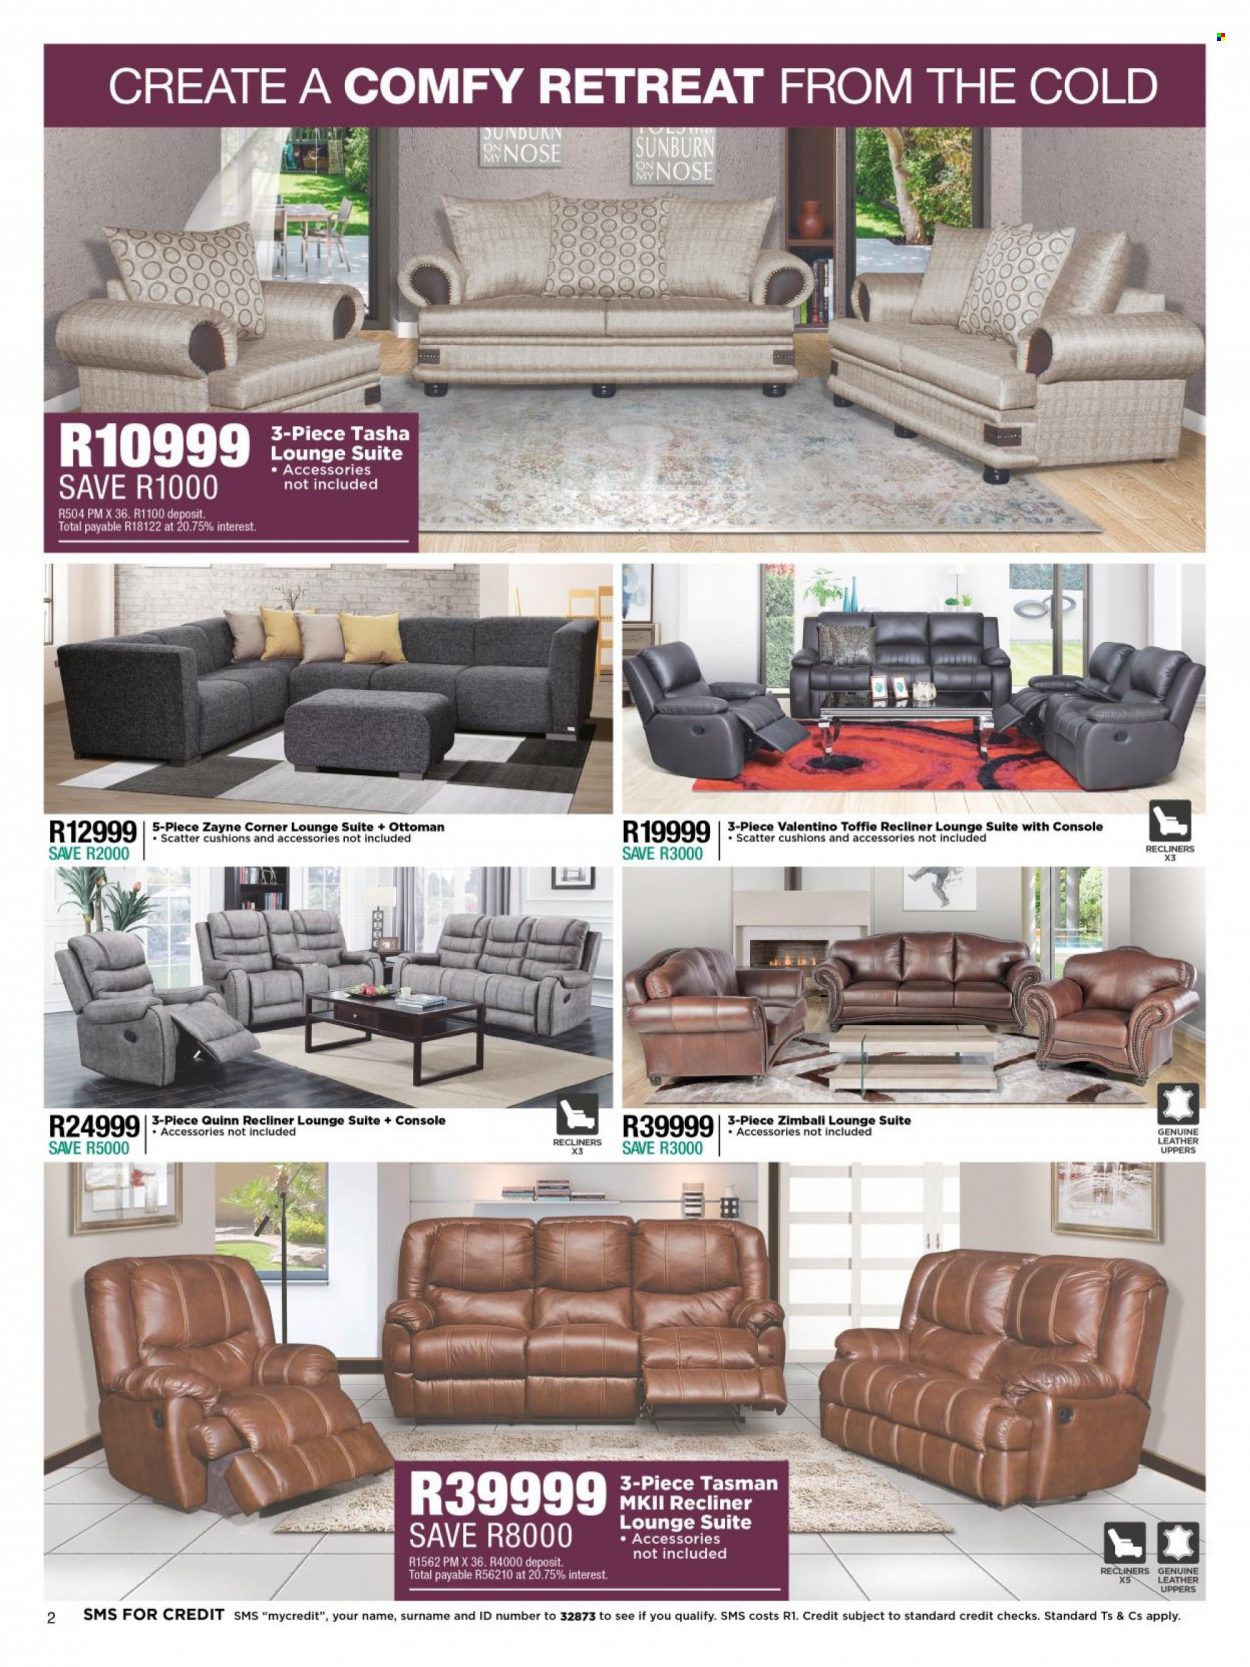 House & Home Specials  - 06.23.2022 - 07.03.2022. Page 2.